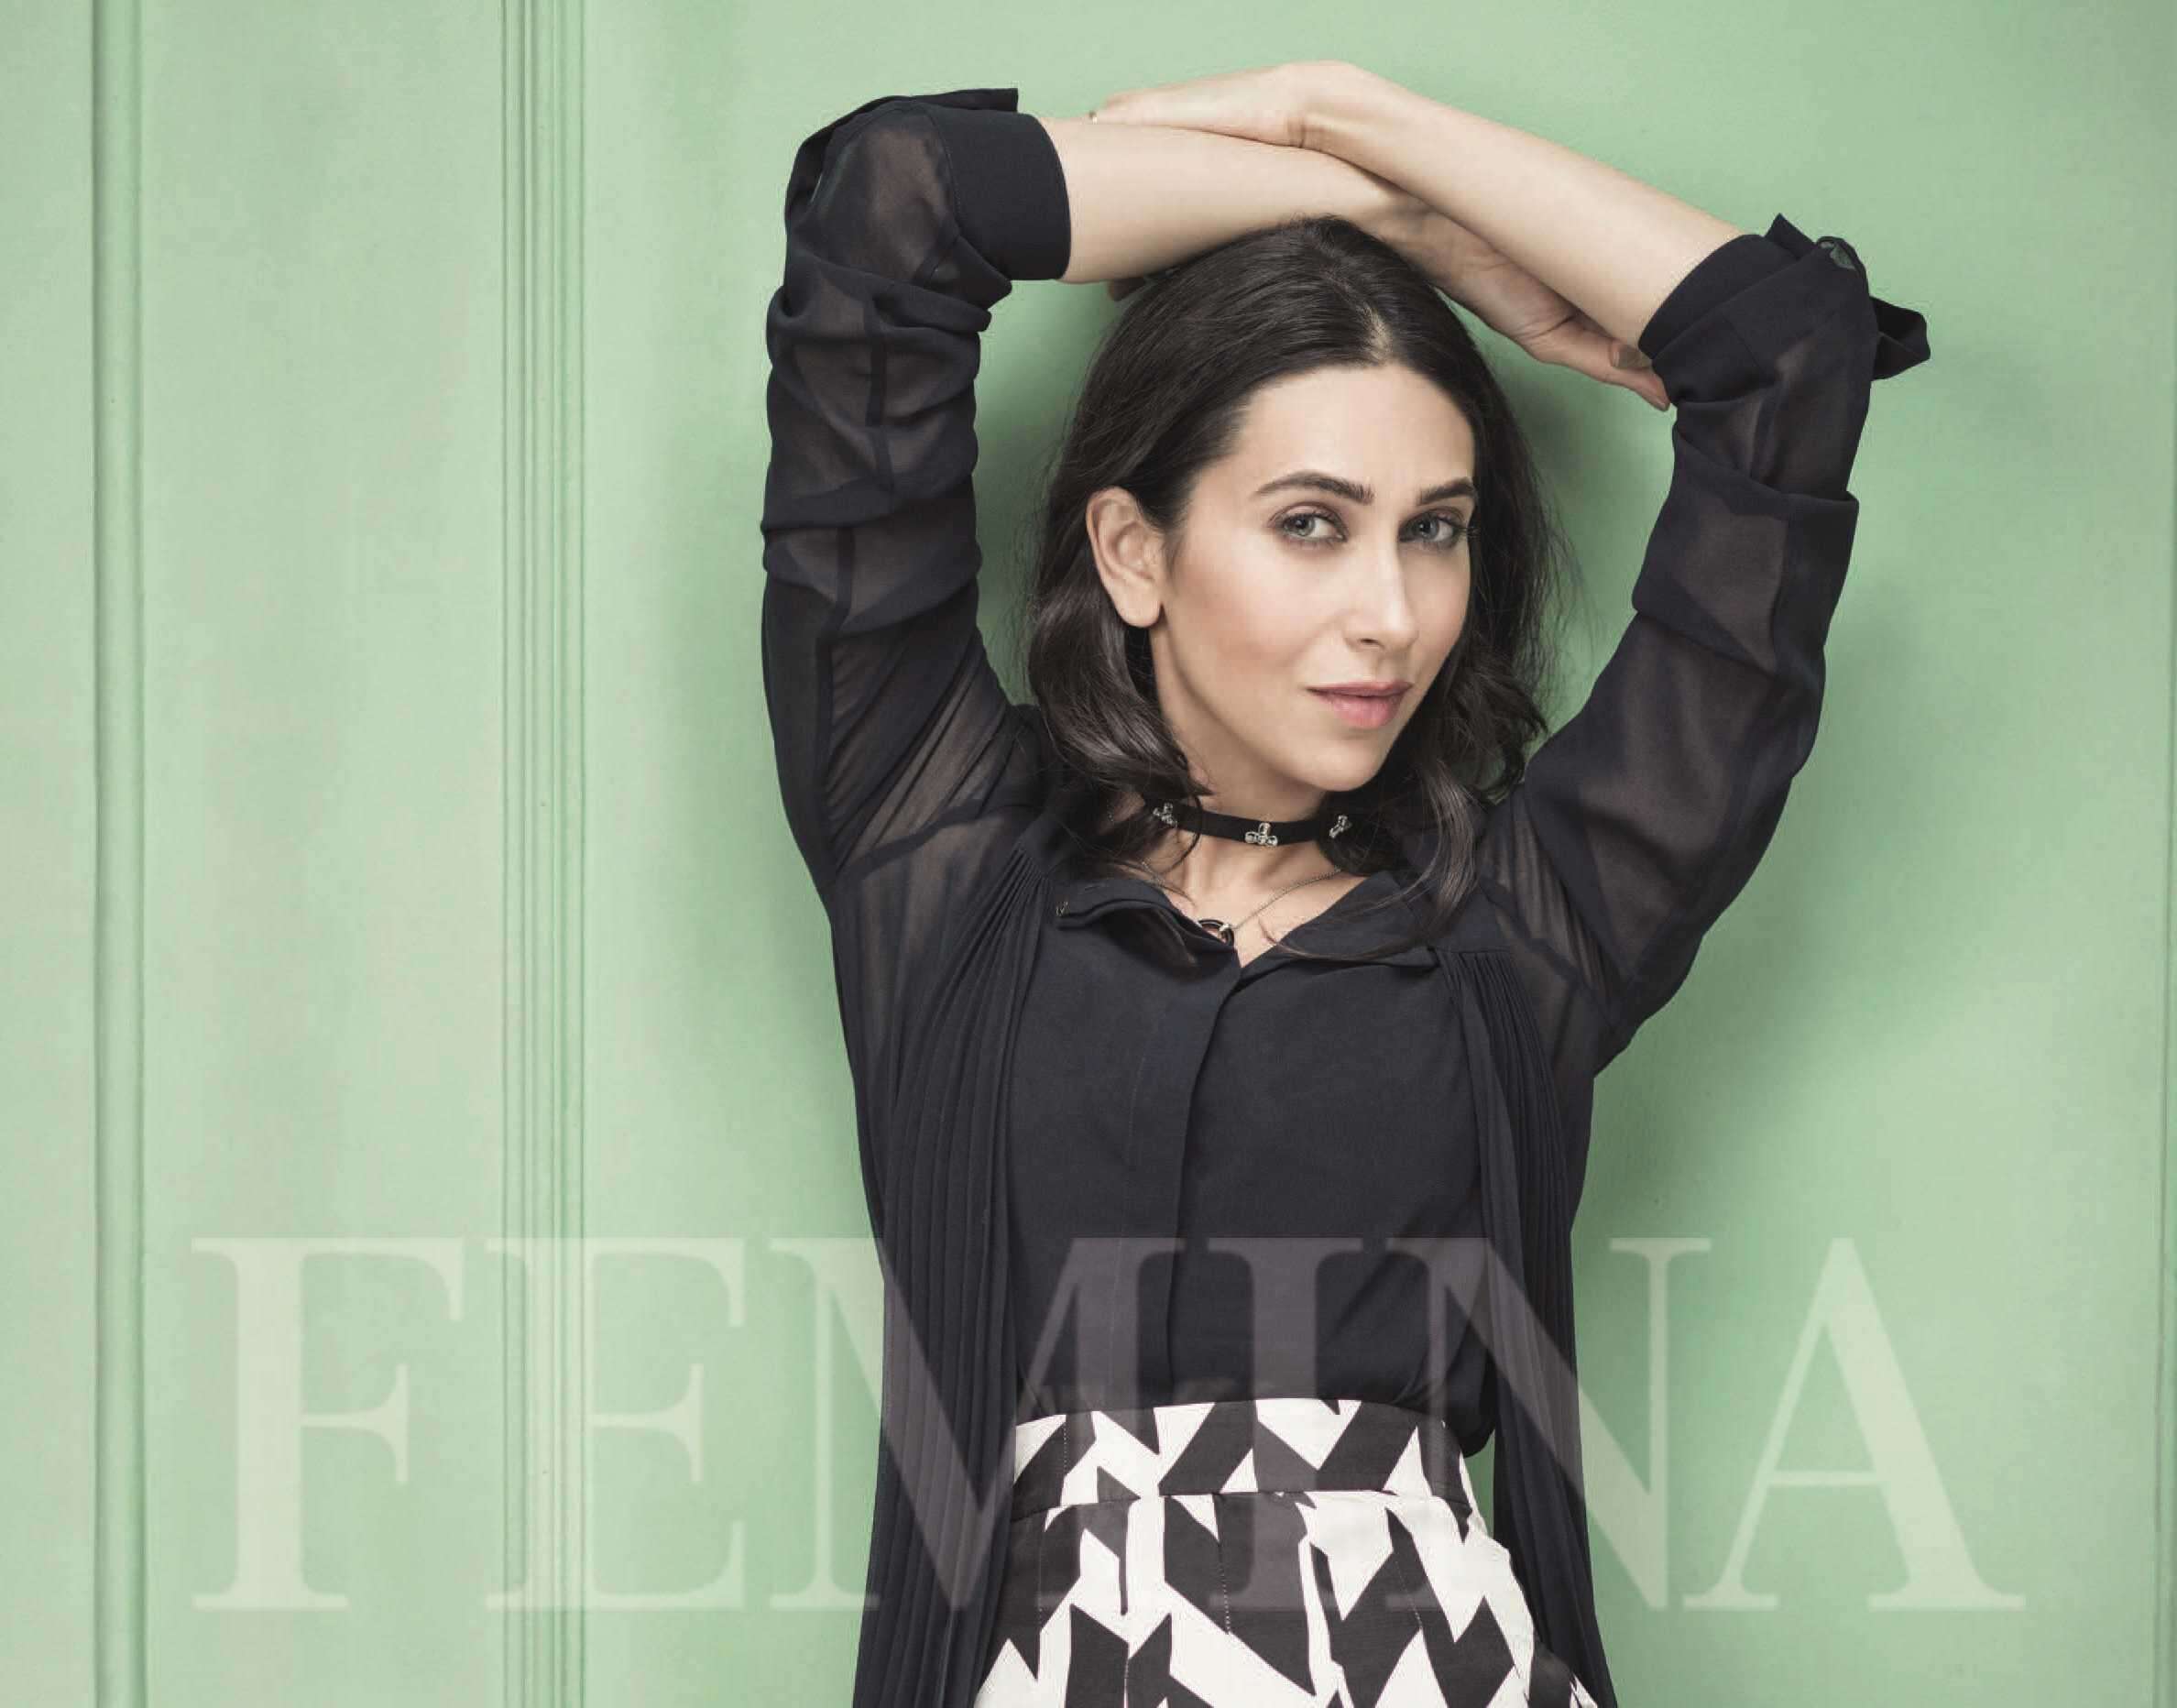 Karishma Kapoor S Sex Free - Fight ageing like Karisma with this diet | Femina.in